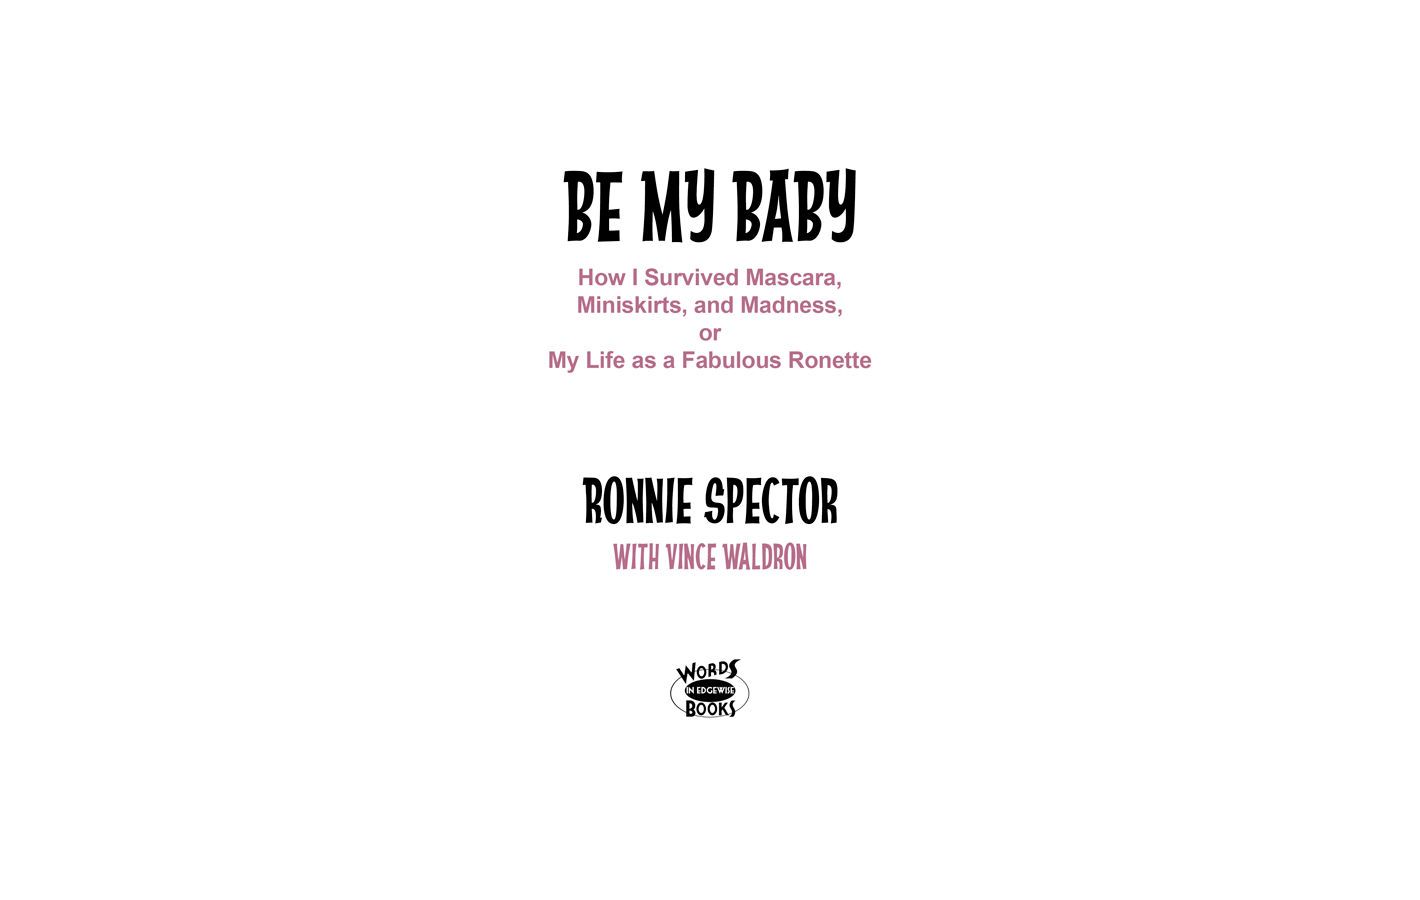 Title Page for Be My Baby, a memoir by Ronnie Spector